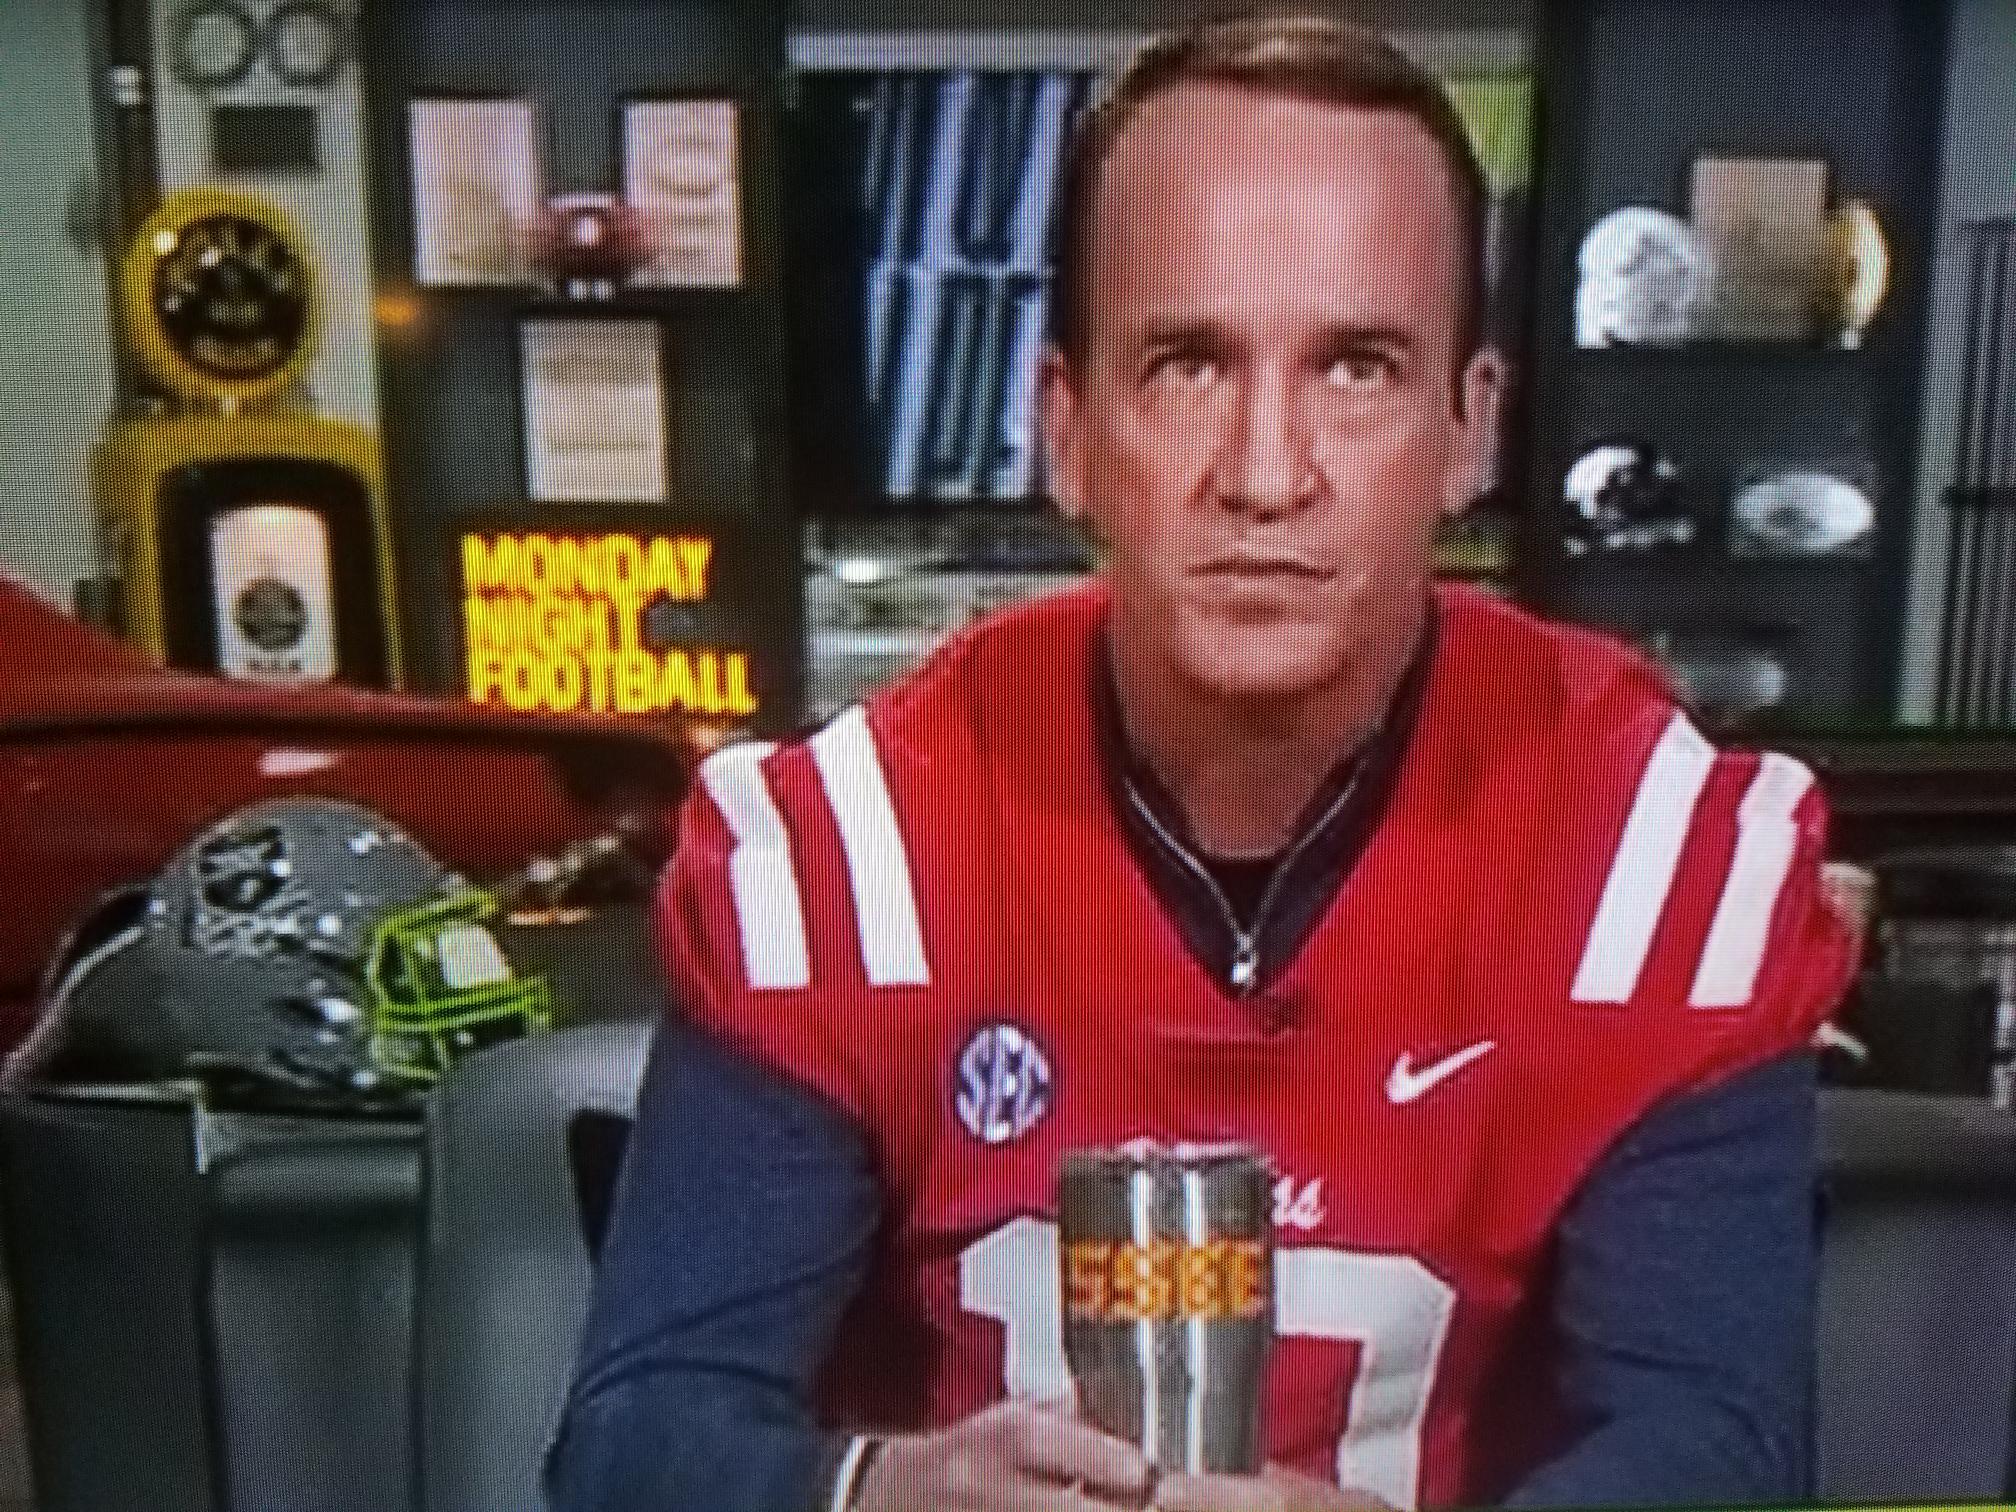 Peyton Manning pays up on Ole Miss-Tennessee bet to Eli, rocks